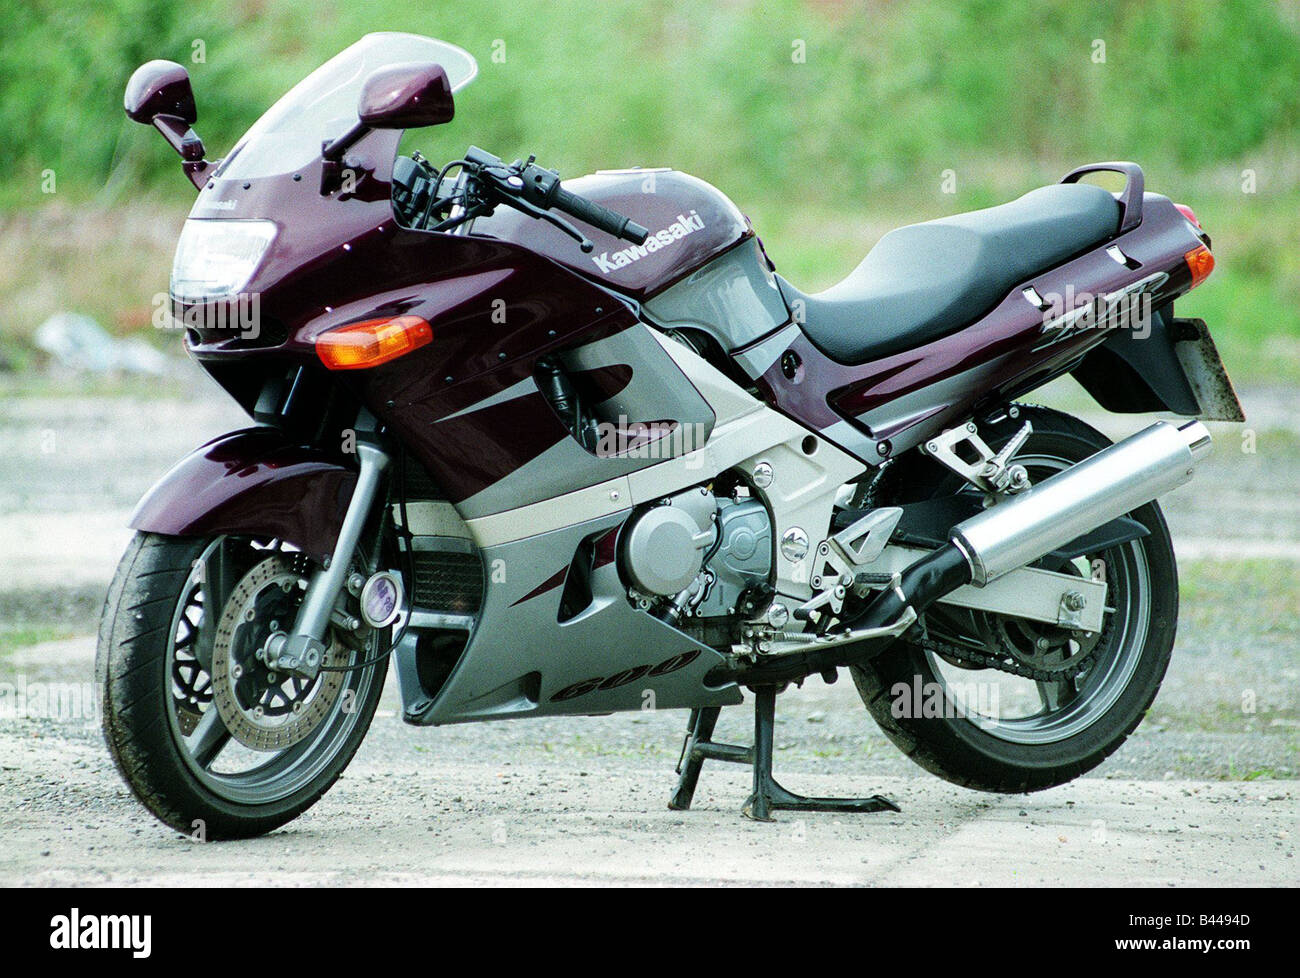 Kawasaki 600 ZZR motorcycle road record June 1998 motoring supplement  purple and silver motorcycle motorbike Stock Photo - Alamy